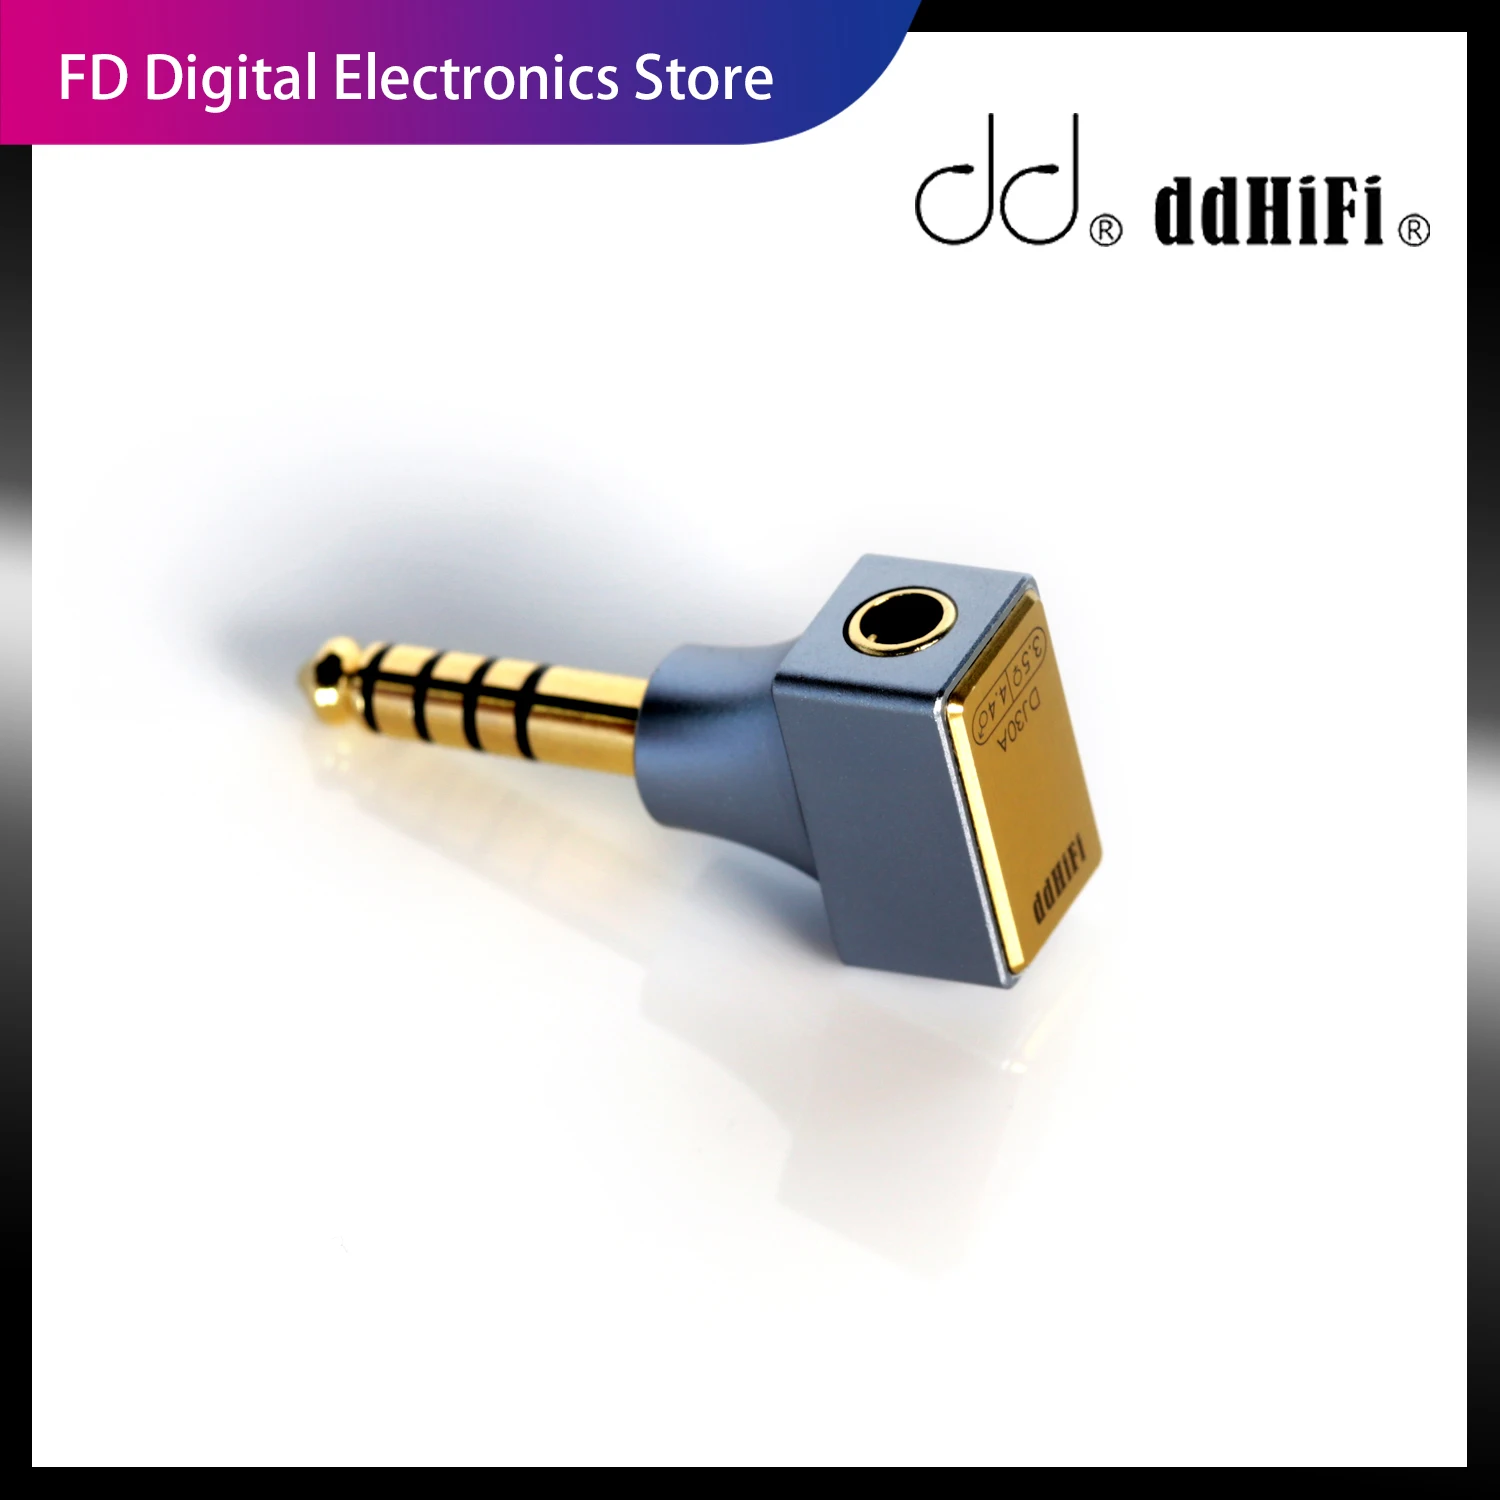 

DD ddHiFi New DJ30A (2021) 3.5 Female to 4.4mm Male Adapter, Unique Design Safe to Use, Apply to Devices with 4.4mm Output Only